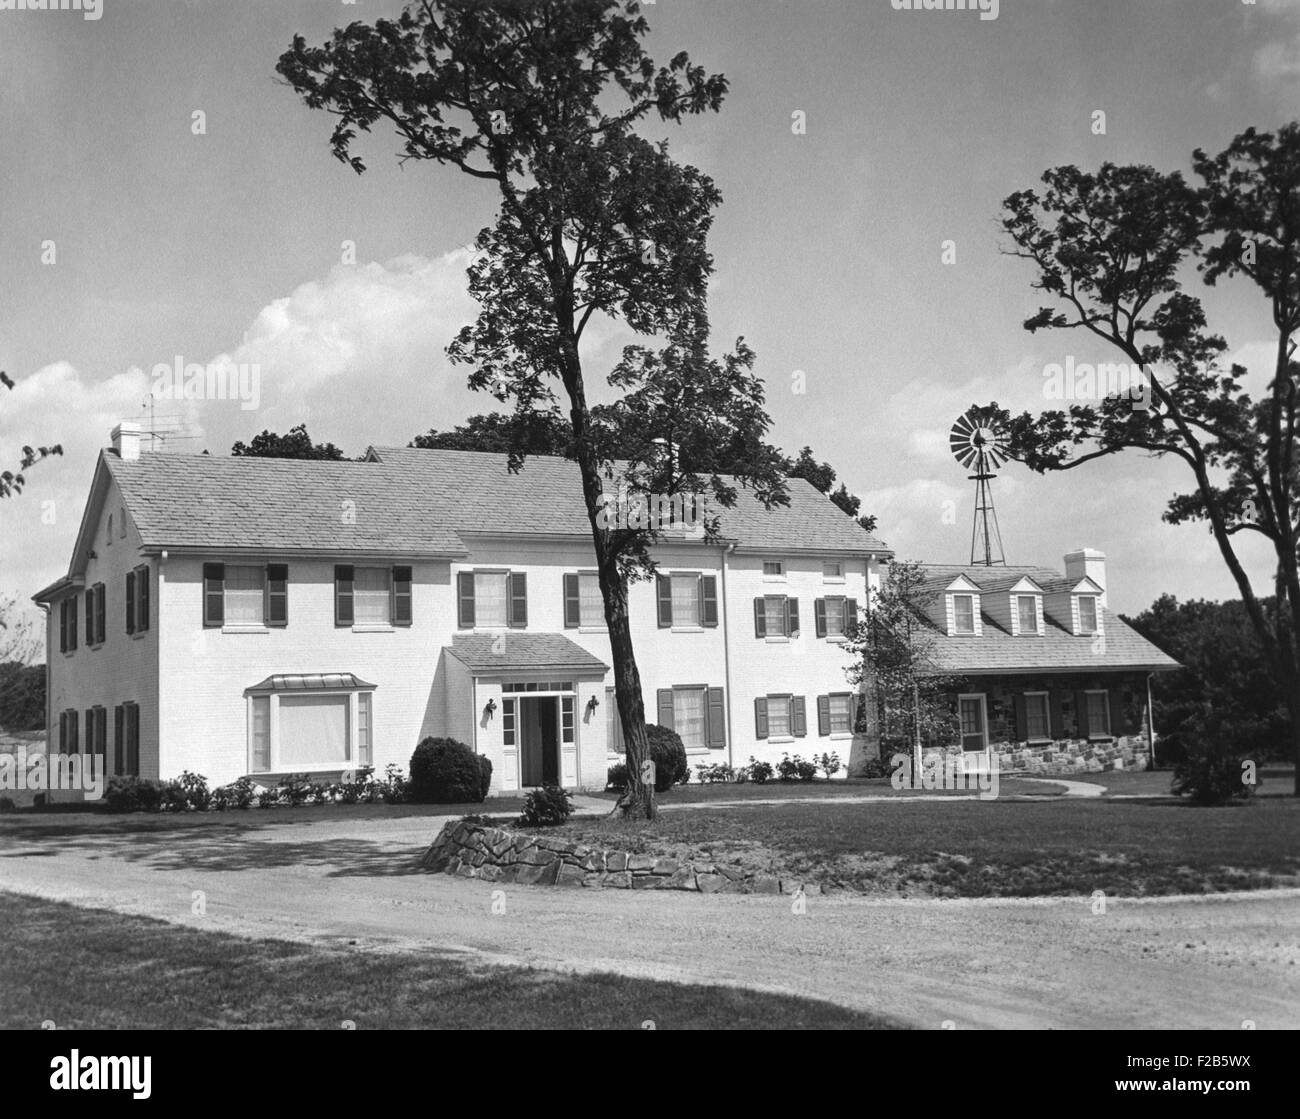 President Eisenhower's main house at his Gettysburg farm. June 3, 1955. The building was renovated from 1953-55 at a cost of $250,000 (equal to over $2 million in 2010). - (BSLOC 2014 16 248) Stock Photo